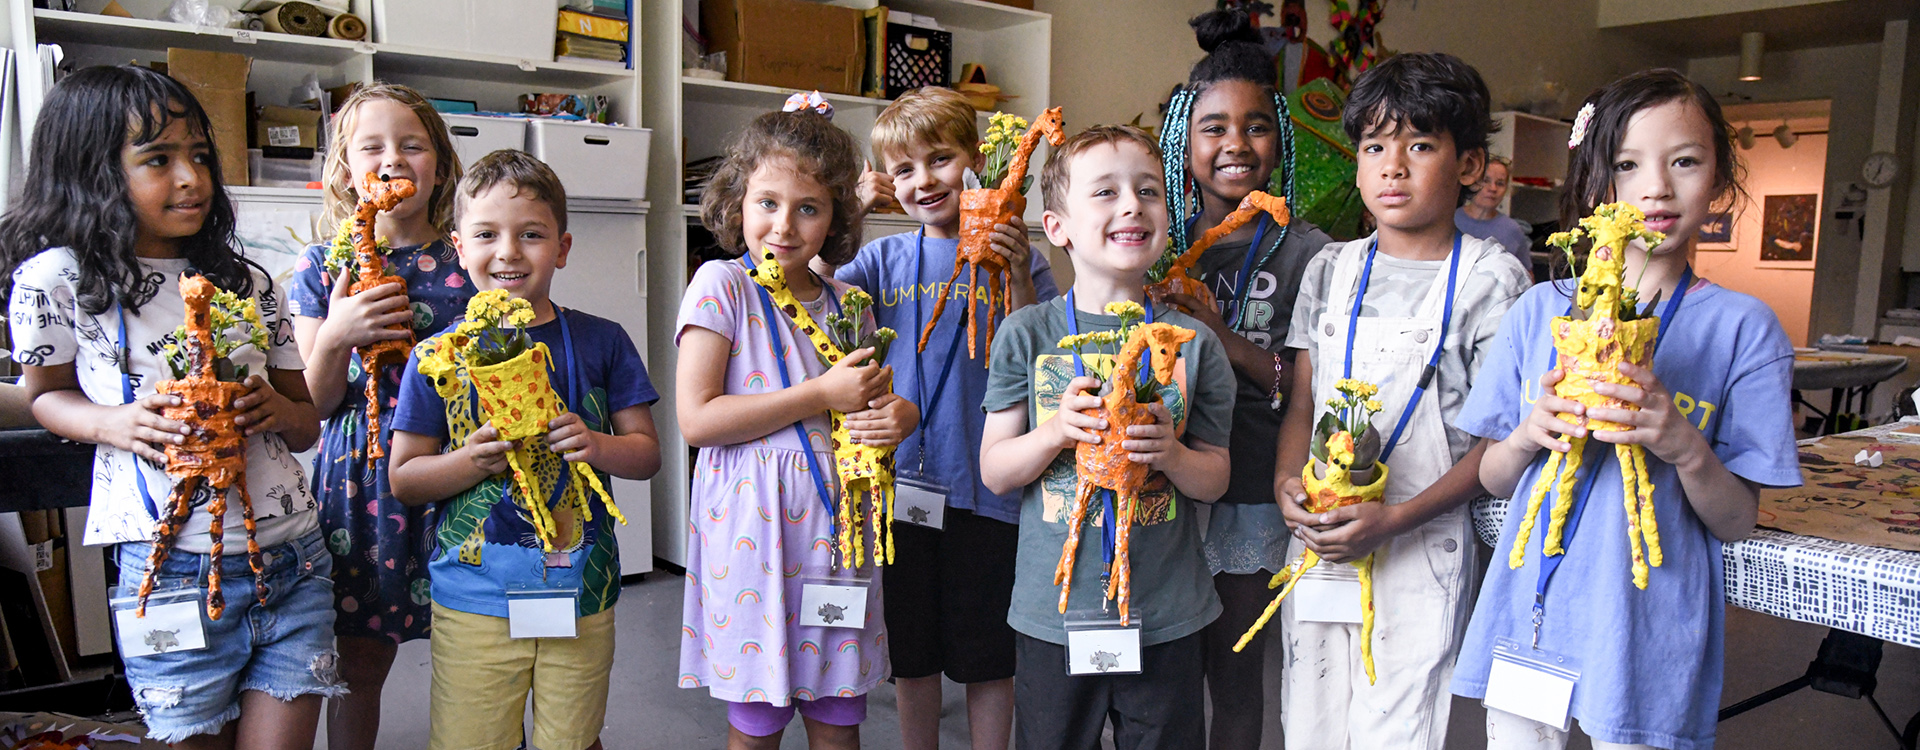 Group of SummerART campers holding up giraffe shaped flower pots and smiling for the camera